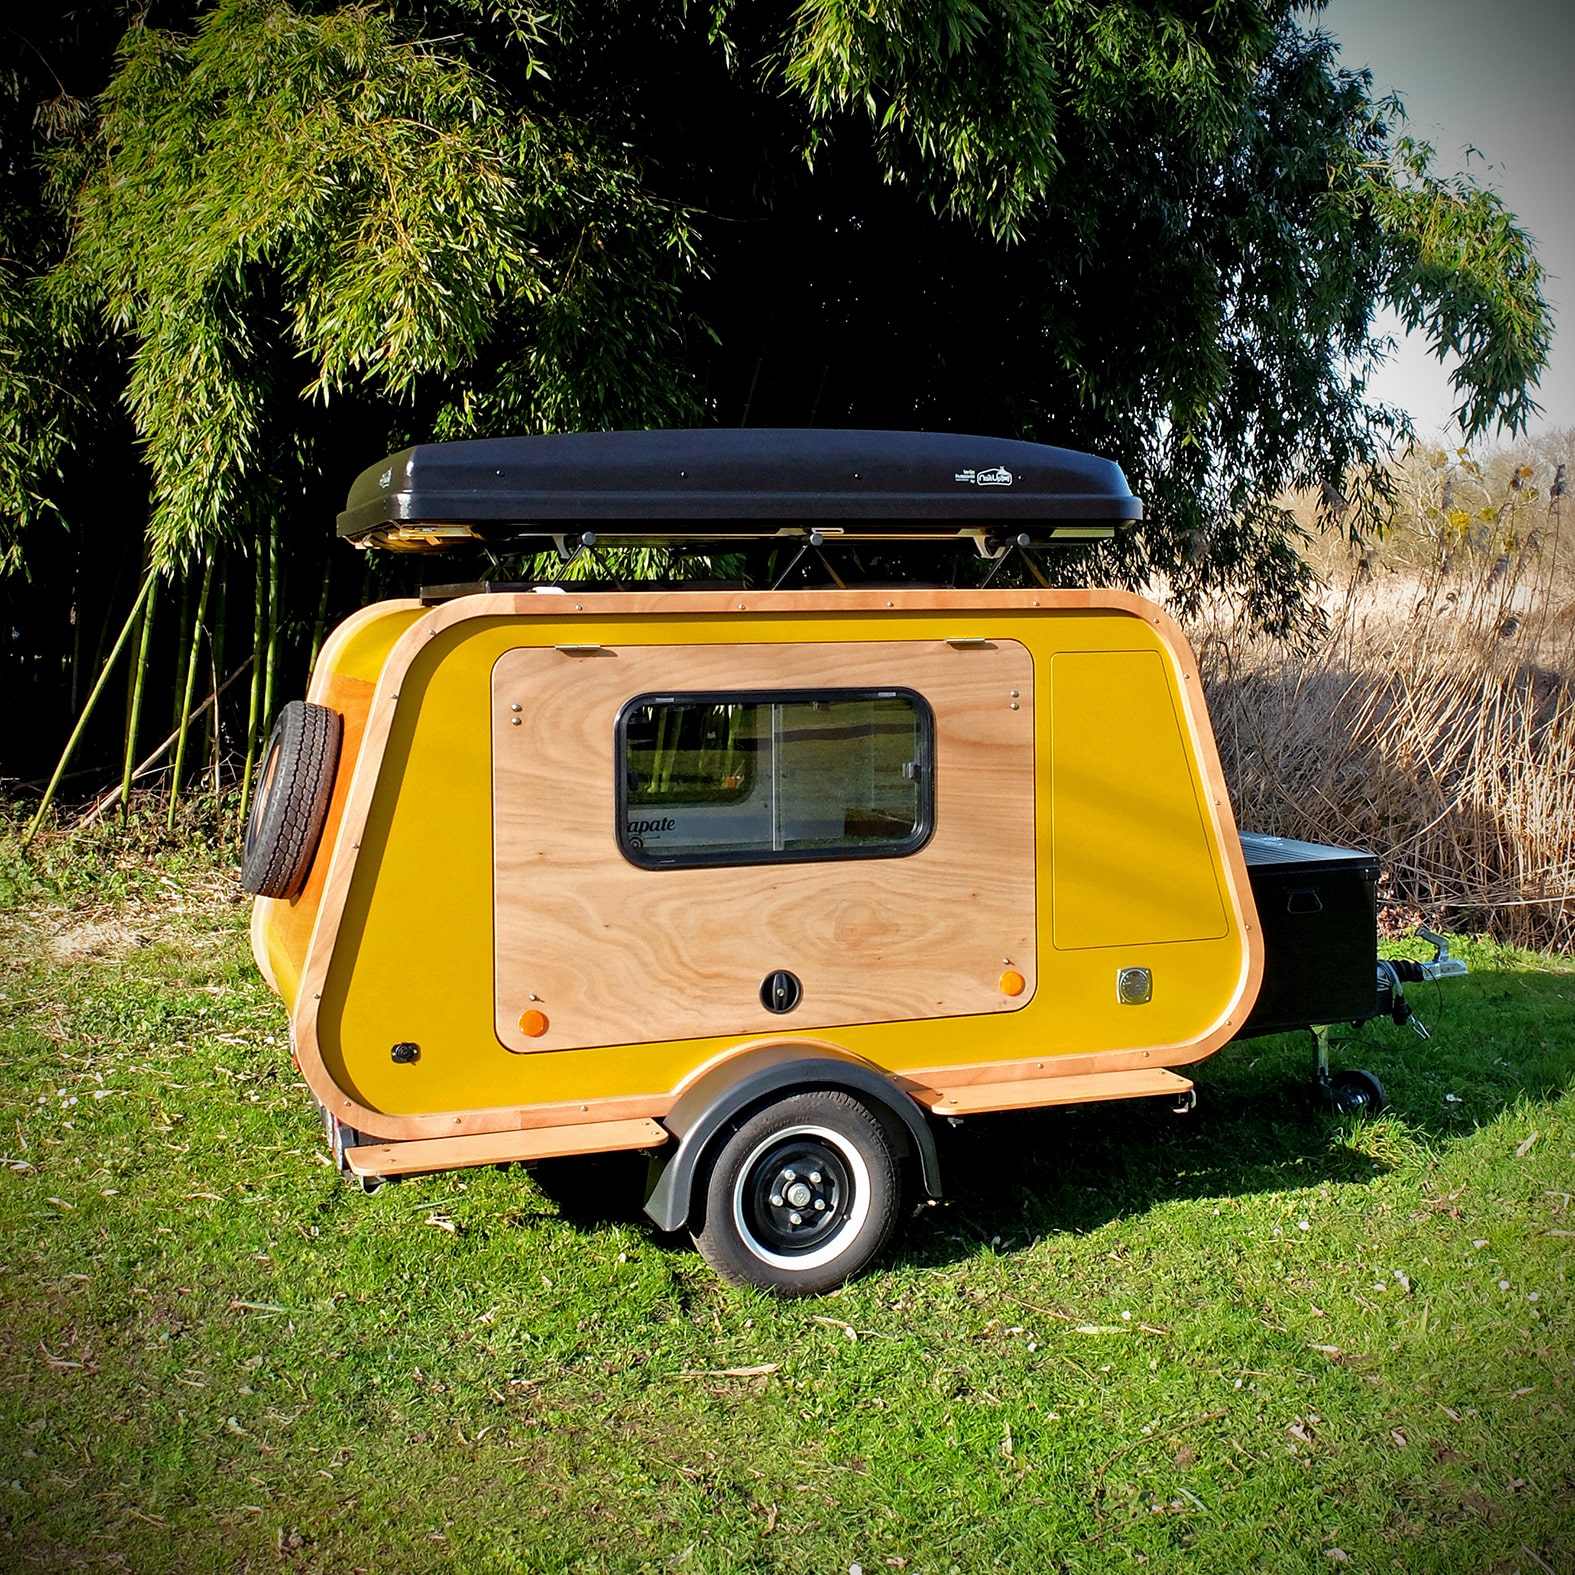 this compact teadrop trailer aims for maximum versatility very chic design 6